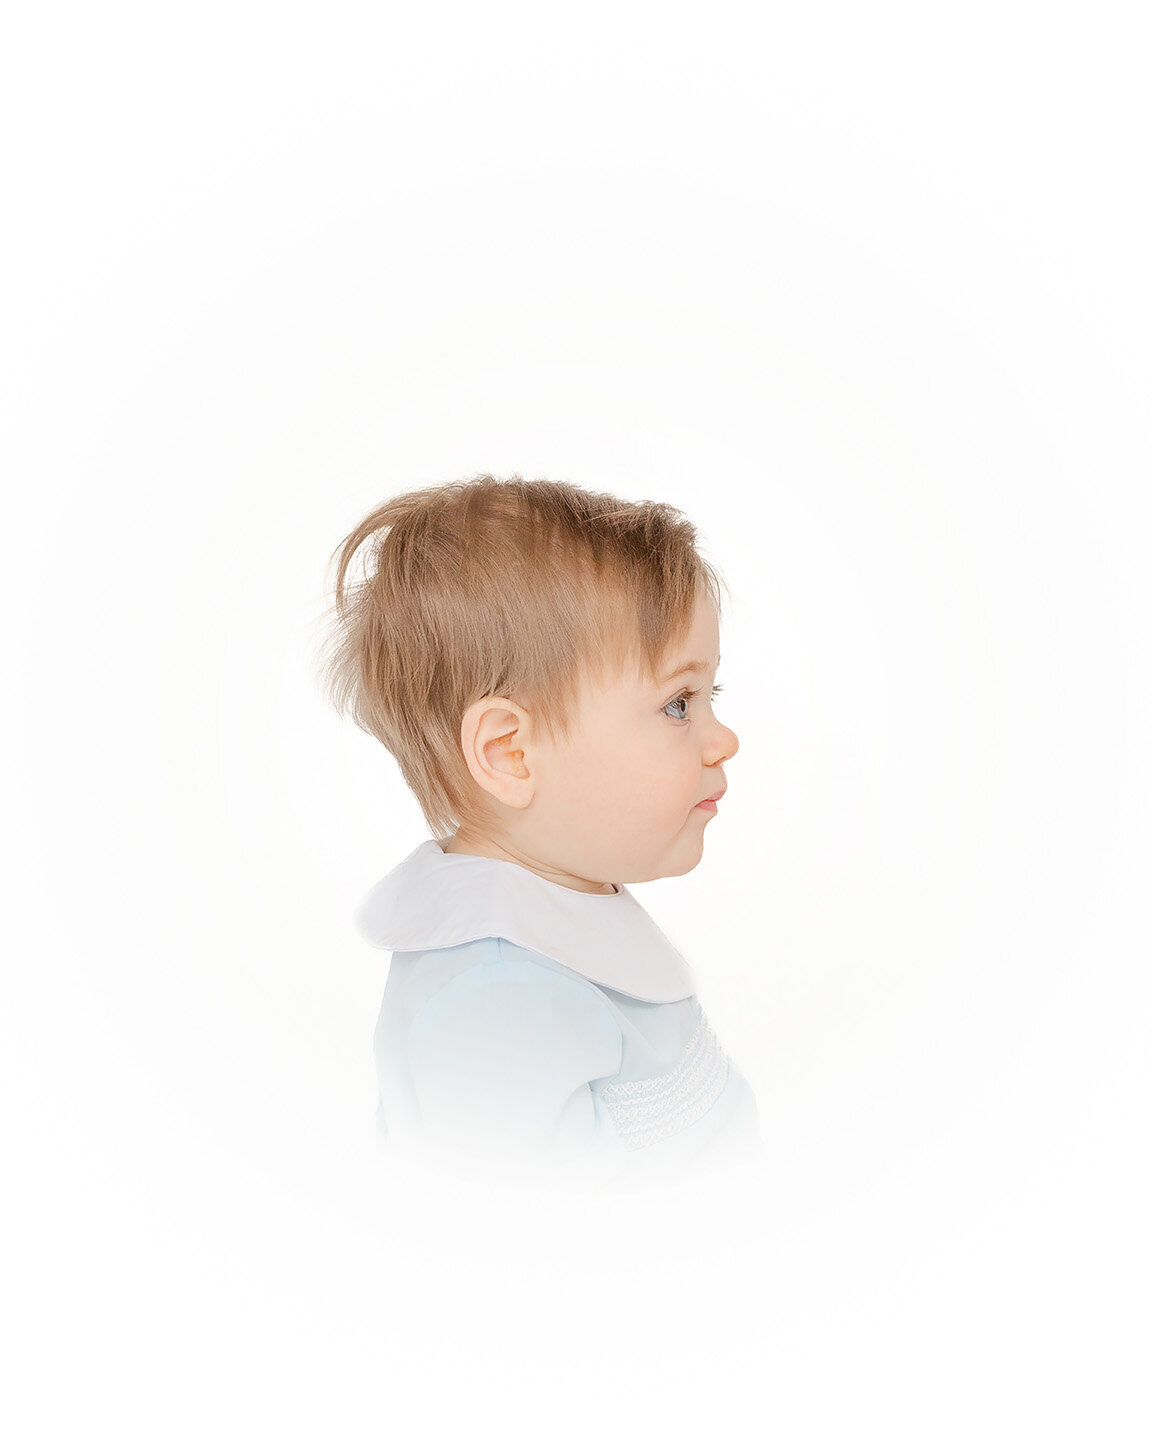 baby boy's right profile during heirloom photography in Fairfax, Virginia